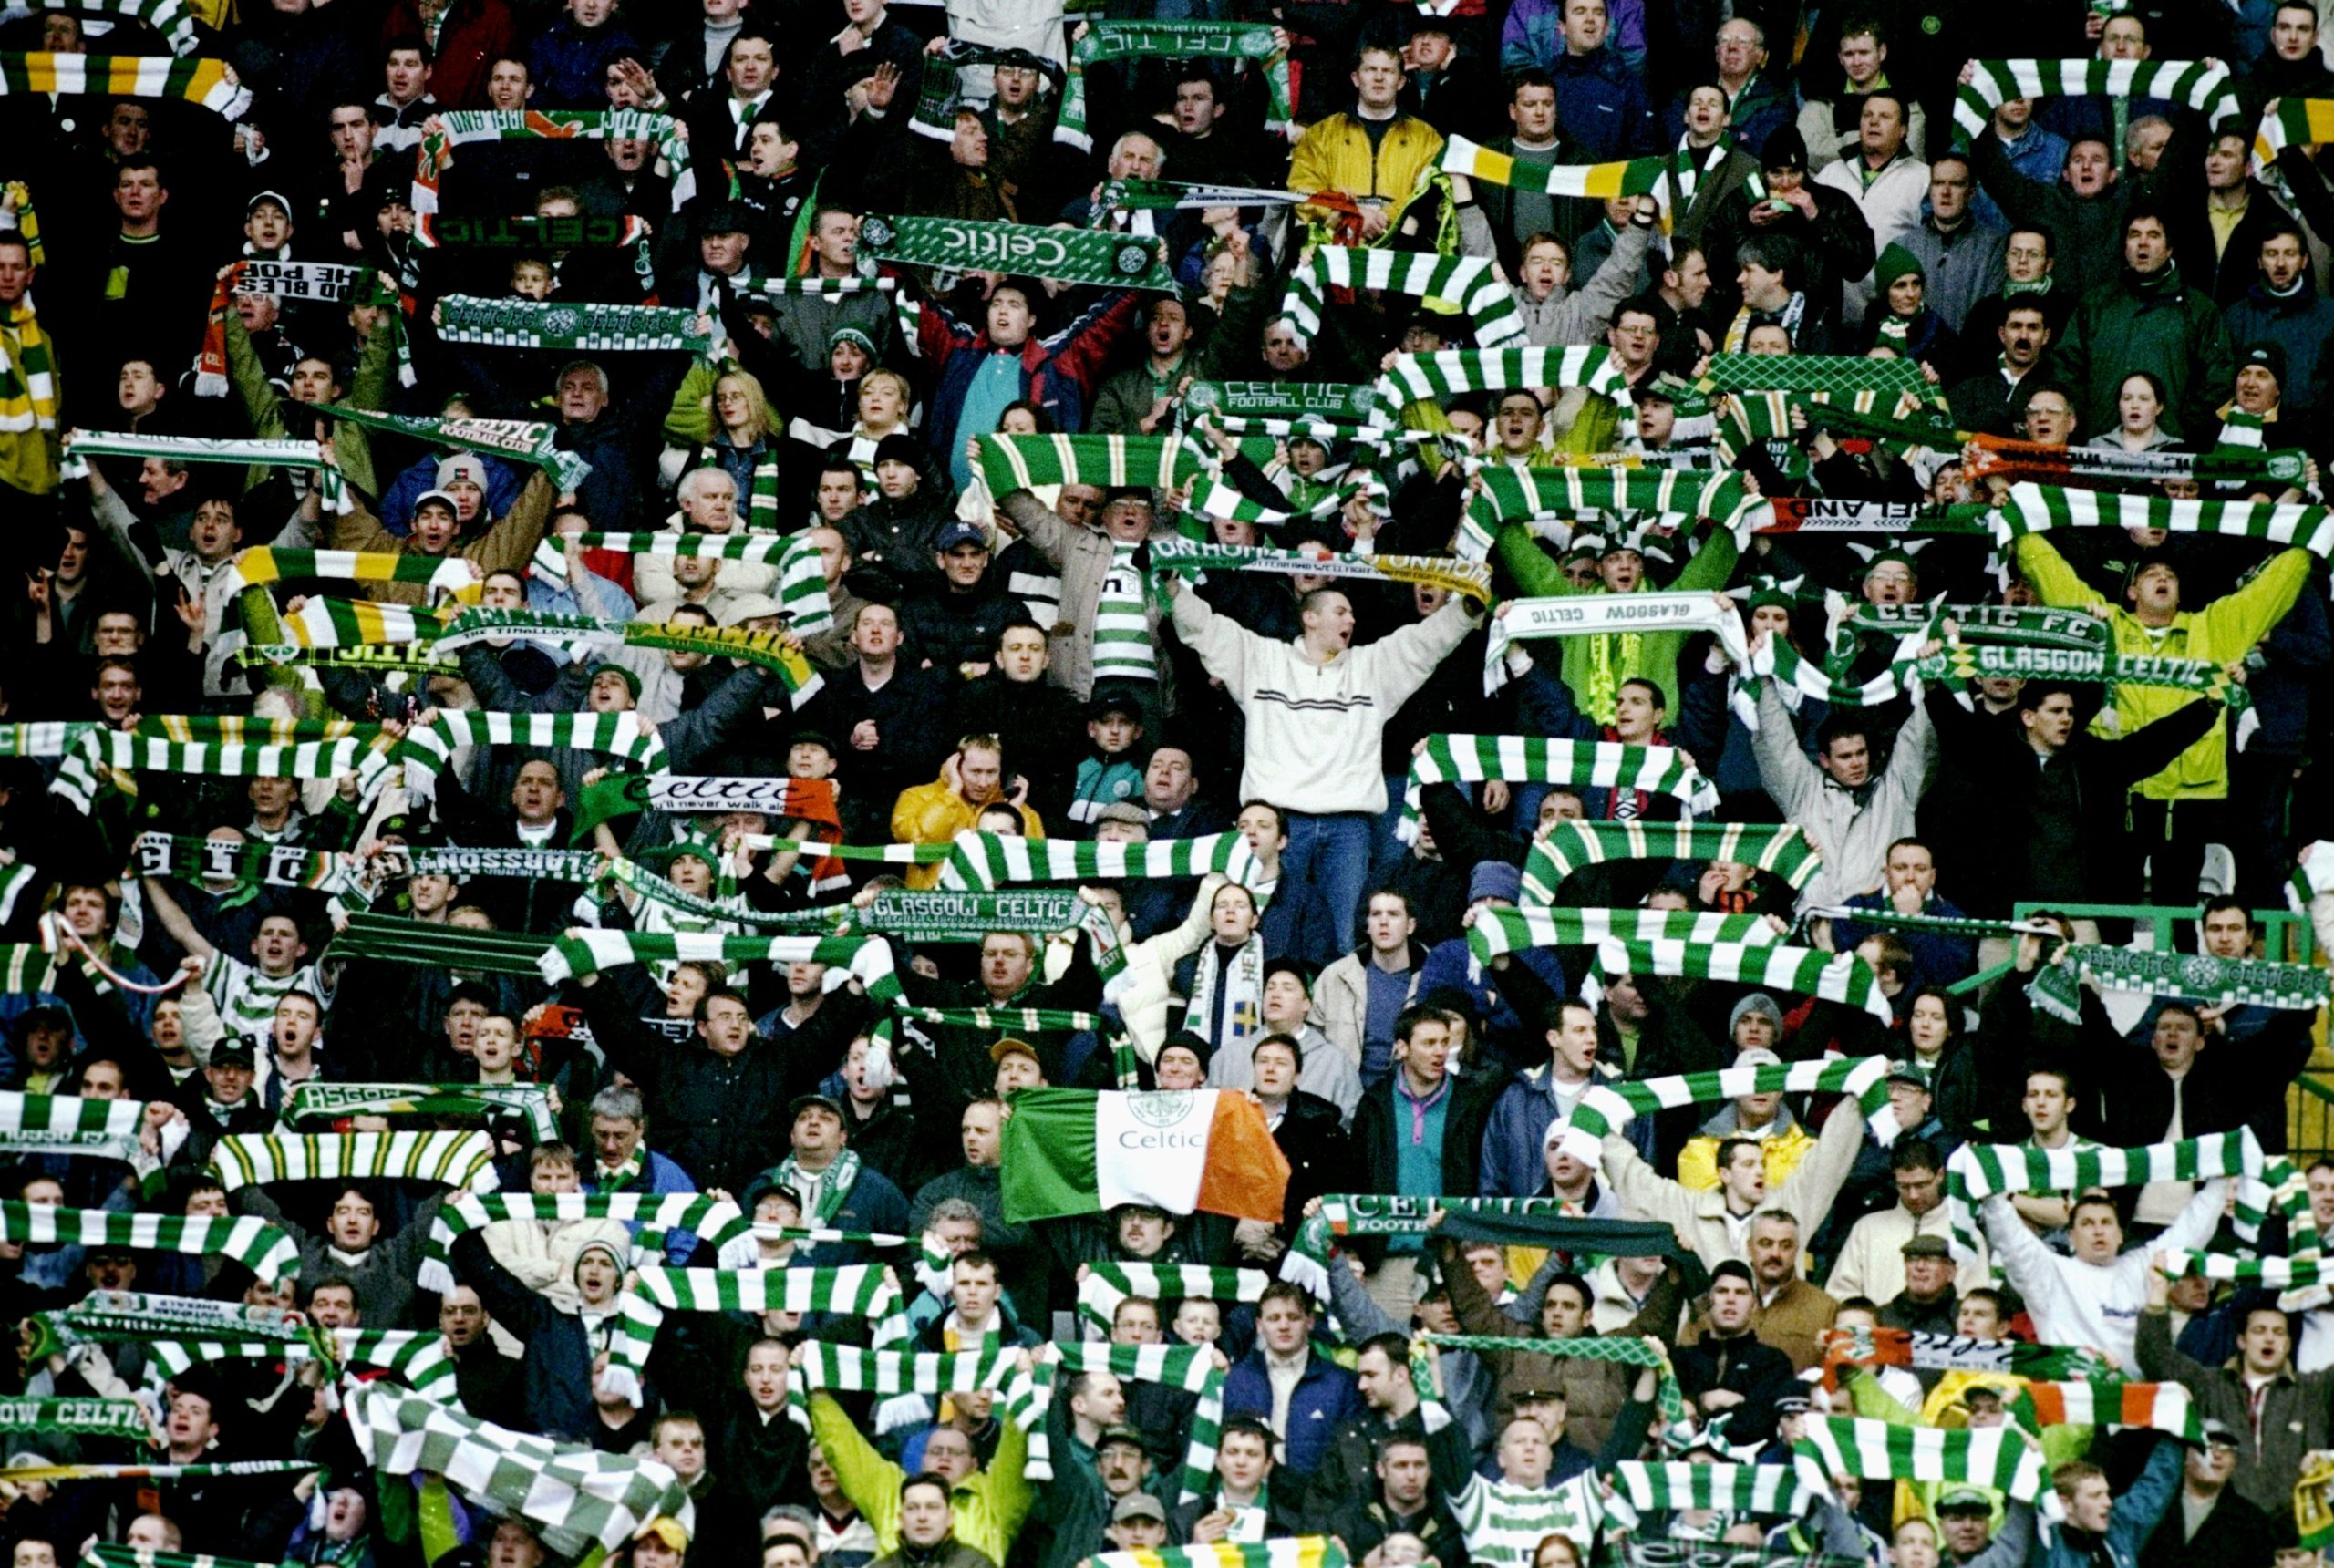 The cost of supporting Celtic